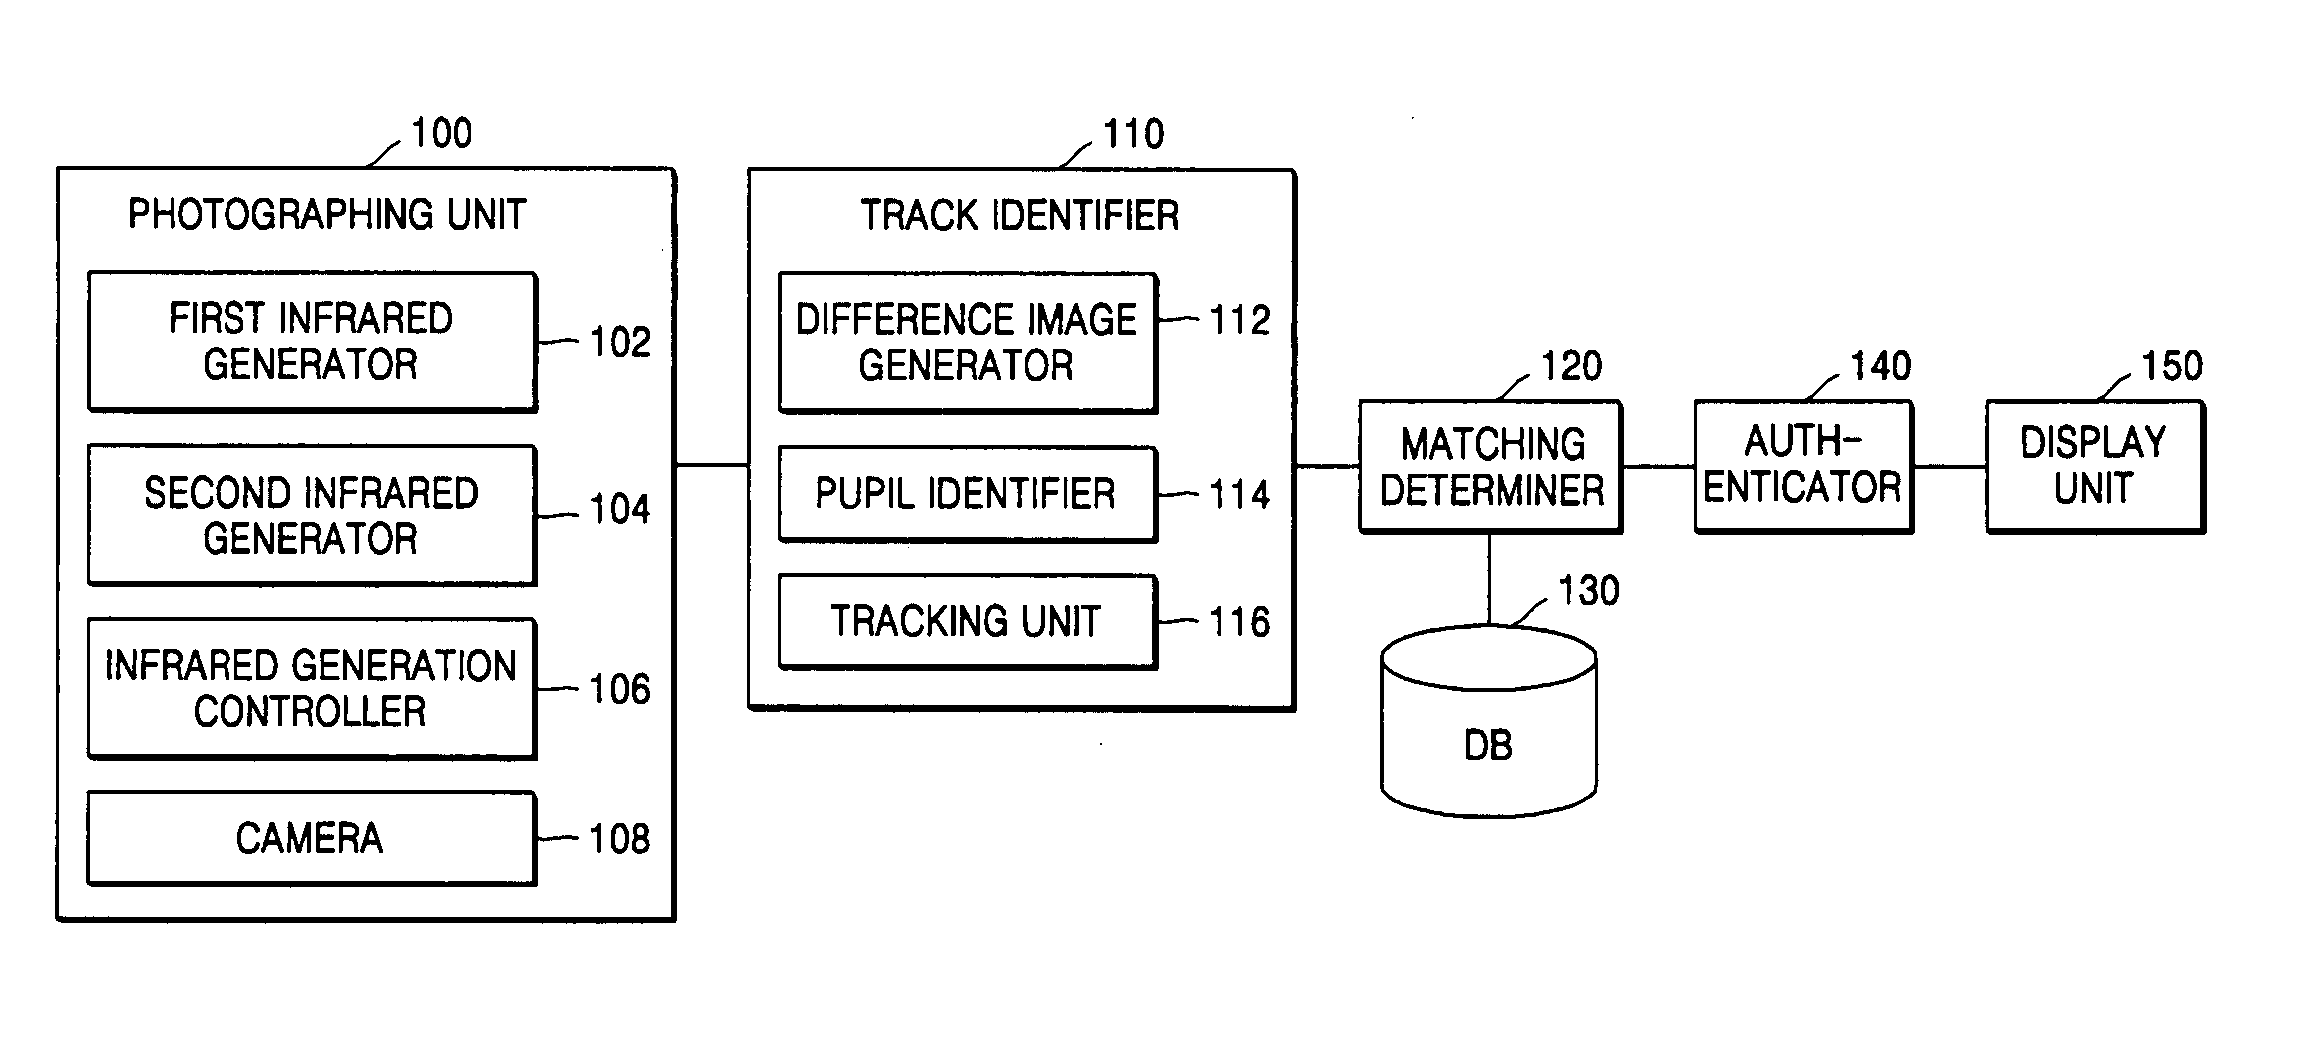 Line-of-sight-based authentication apparatus and method